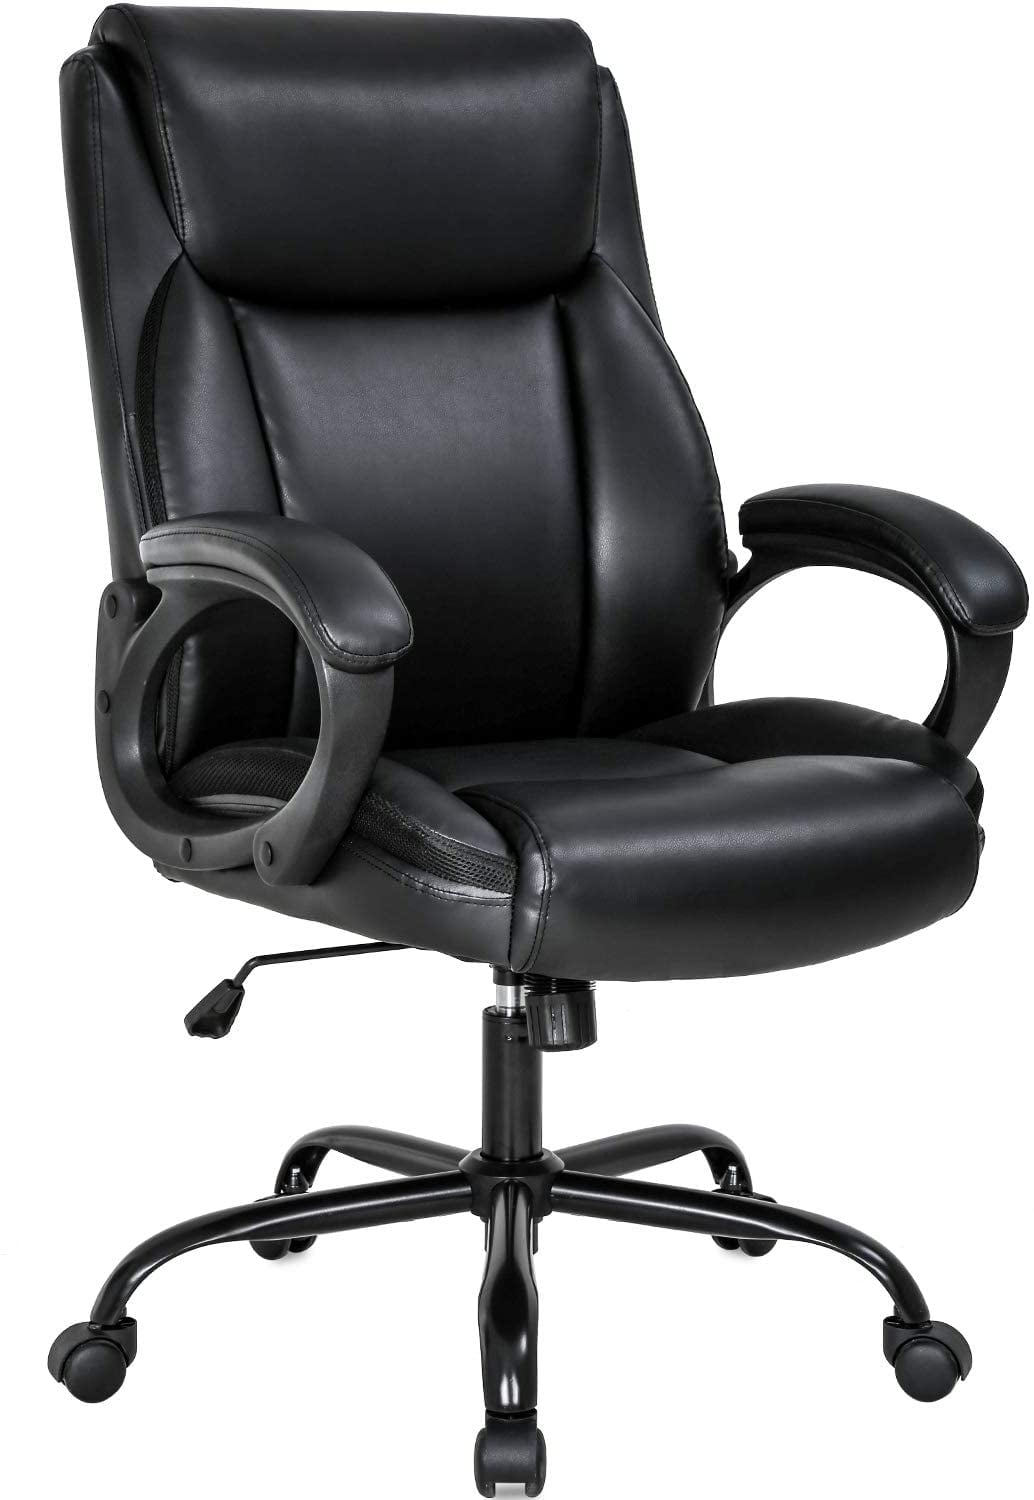 Ergonomic PU Leather High Back Computer Chair Seats For Home Office US 